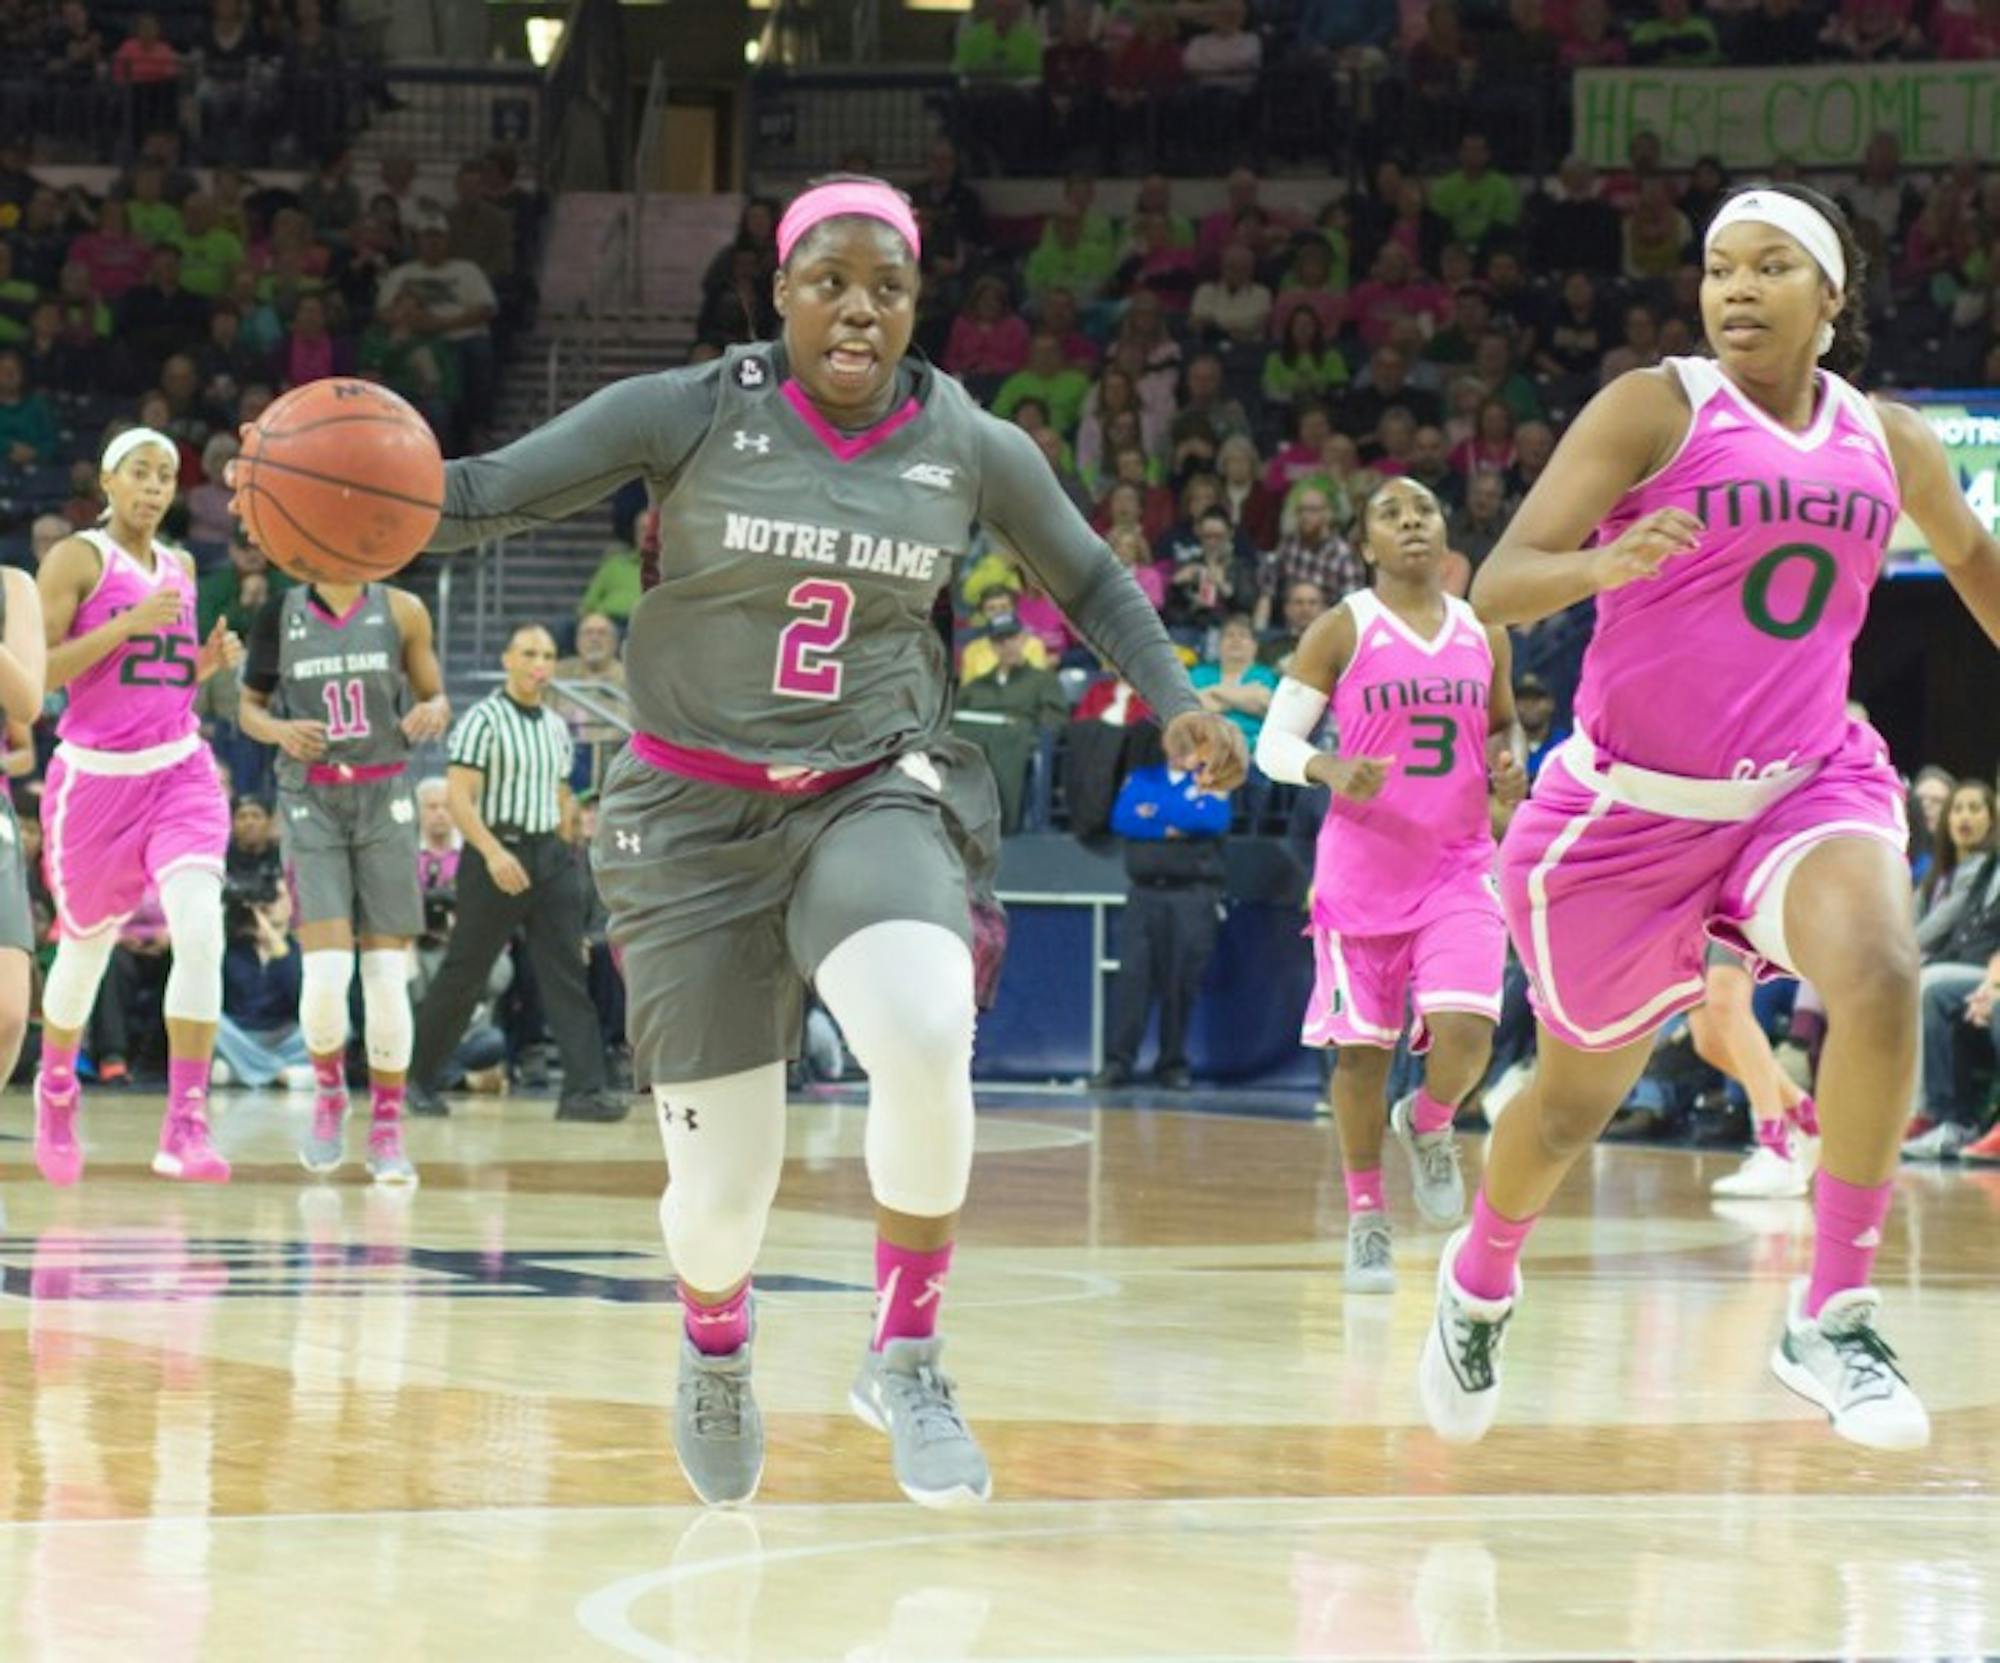 Freshman guard Arike Ogunbowale drives to the basket during Notre Dame’s 90-69 victory over Miami at Purcell Pavilion on Feb. 14. Ogunbowale scored 11 points for the Irish during their win against Florida State.